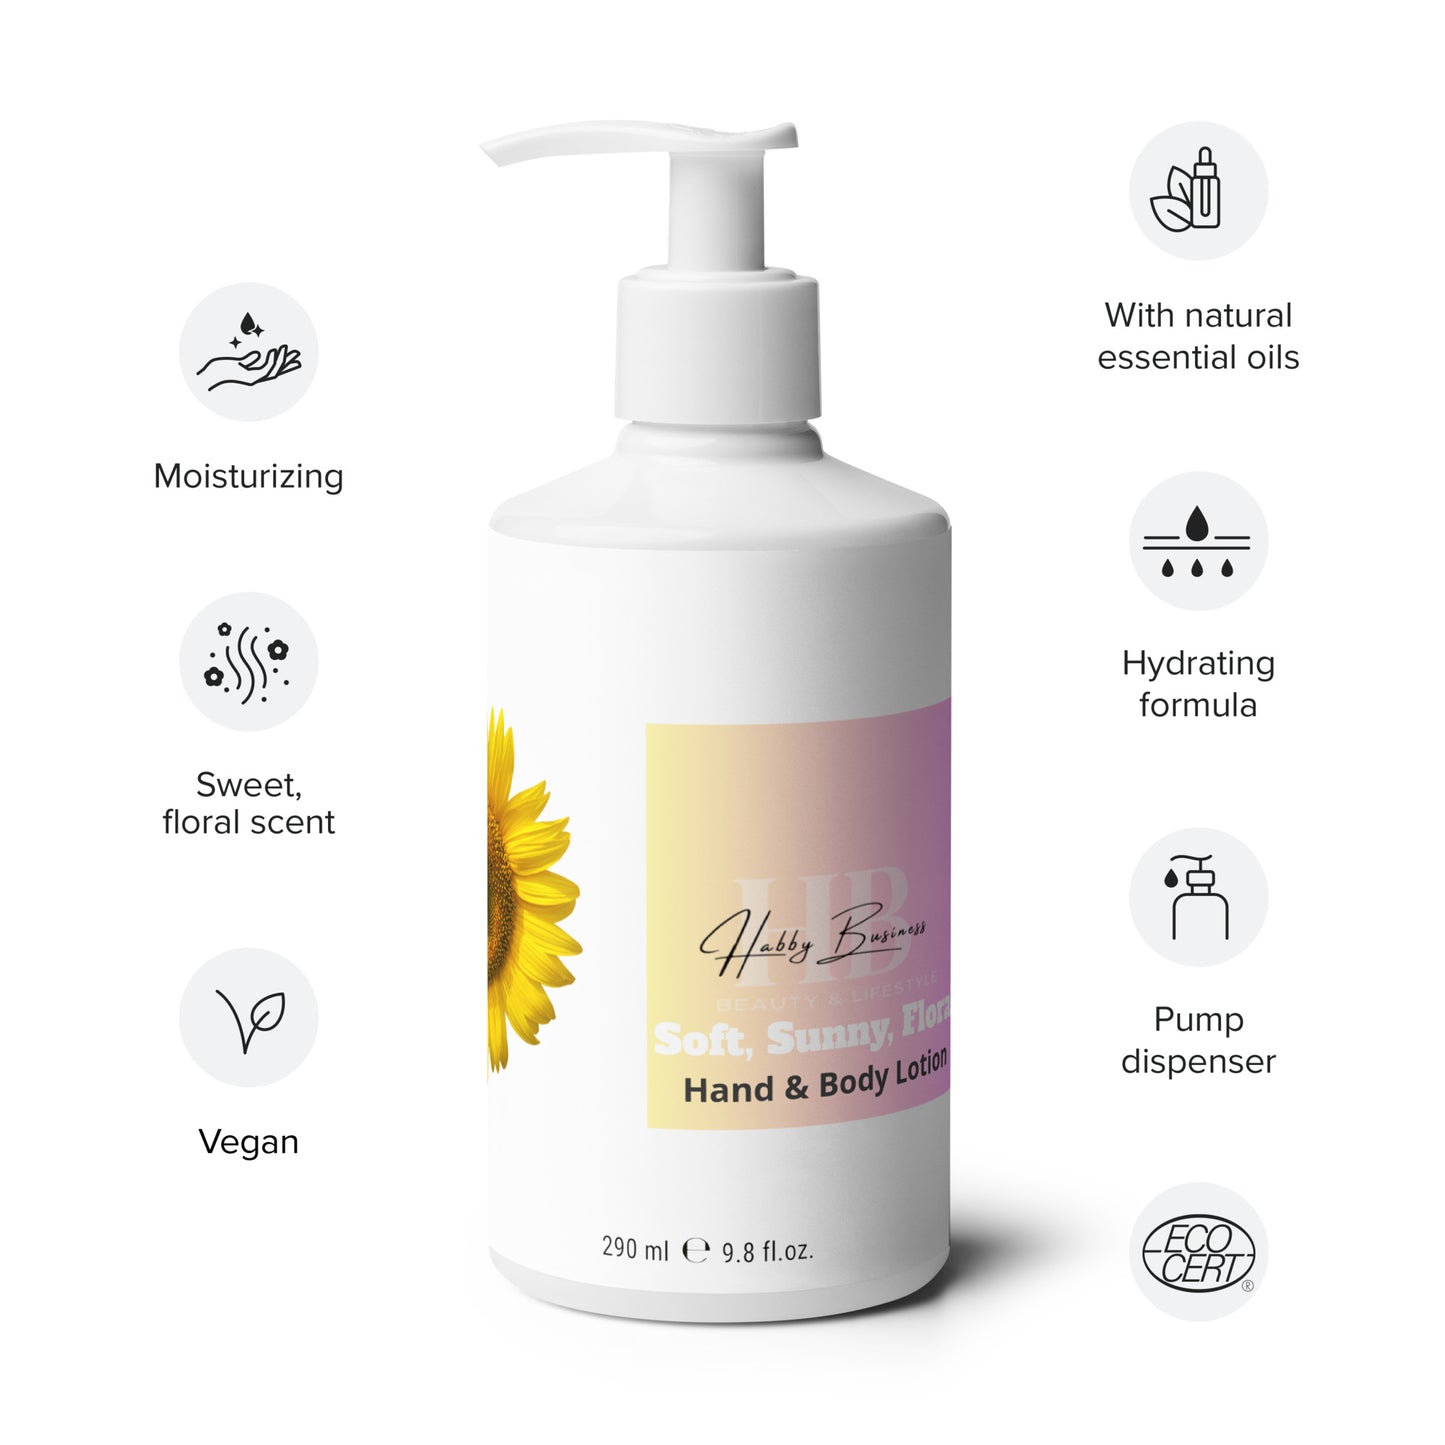 Soft Sunny Floral Hand & Body Lotion